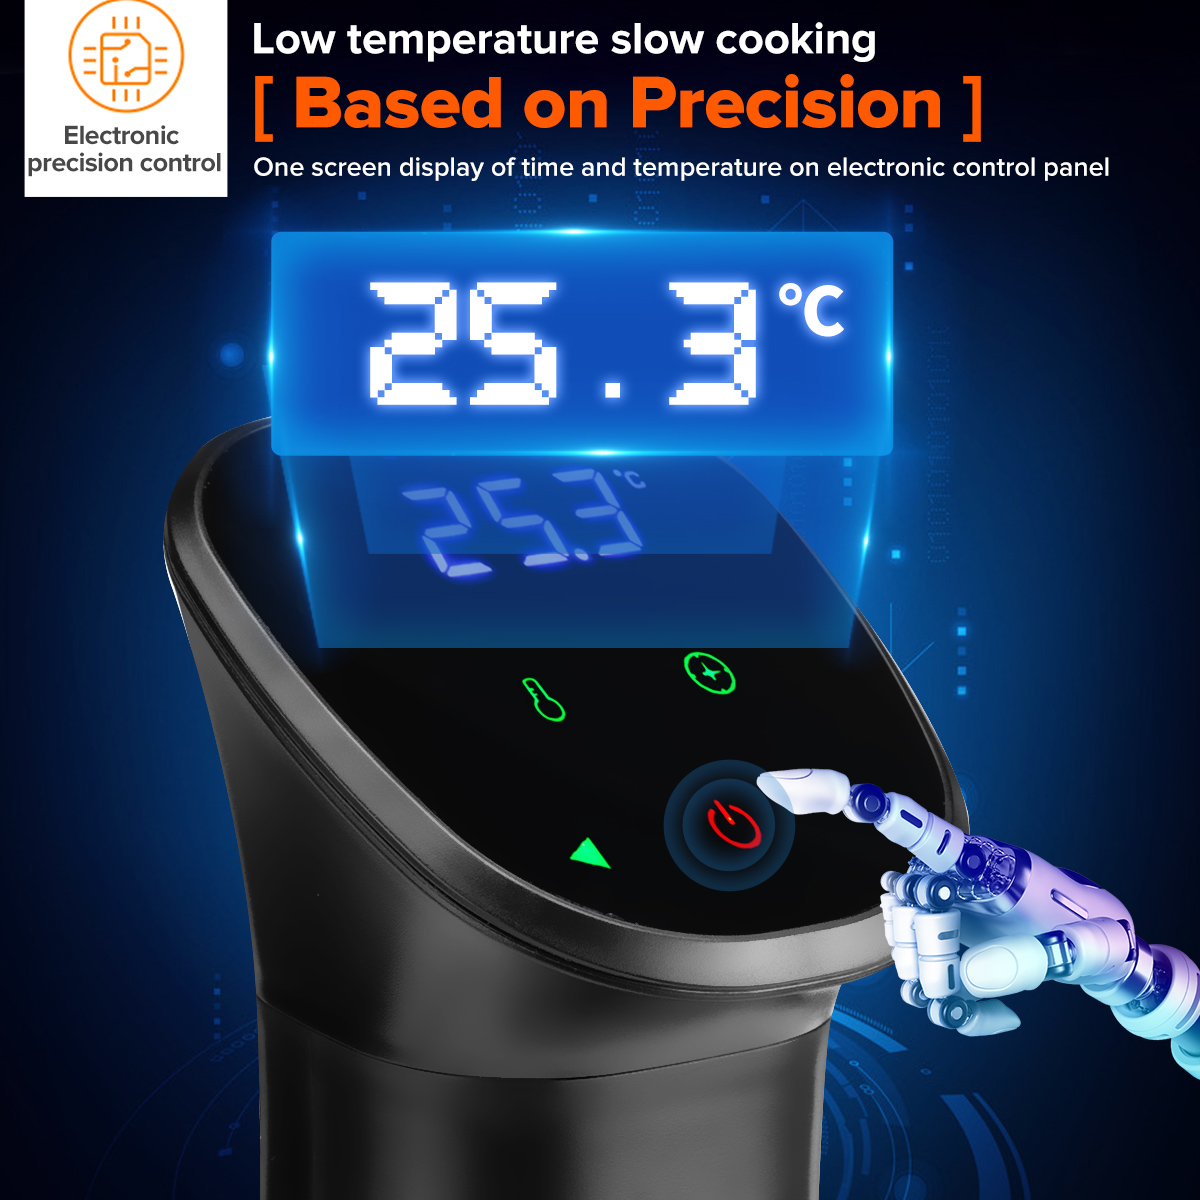 AUGIENB-SC-003-1600W-LCD-Touch-Sous-Vide-Cooker-Waterproof-Sous-Vide-Immersion-Circulator-Vacuum-Hea-1936799-4